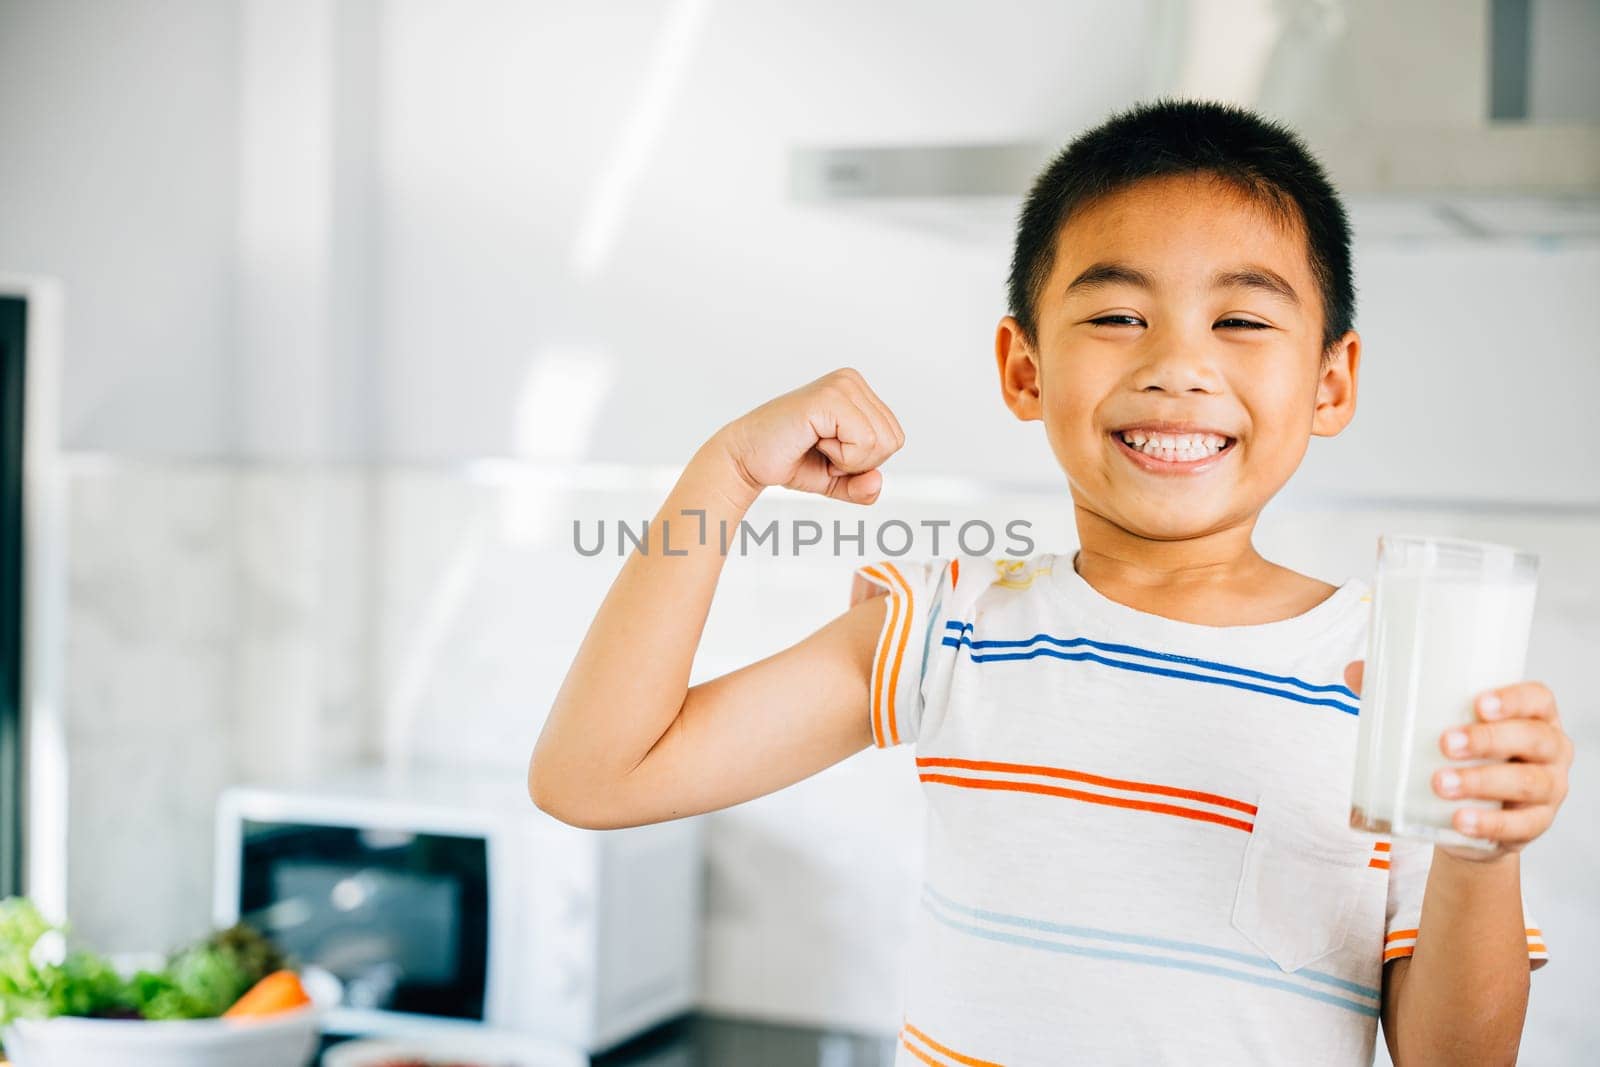 Asian little boy, cute son, holds milk in kitchen. Portrait of preschool child enjoying drink, smiling with joy. Happy kid sips calcium-rich liquid, radiating happiness at home give me.